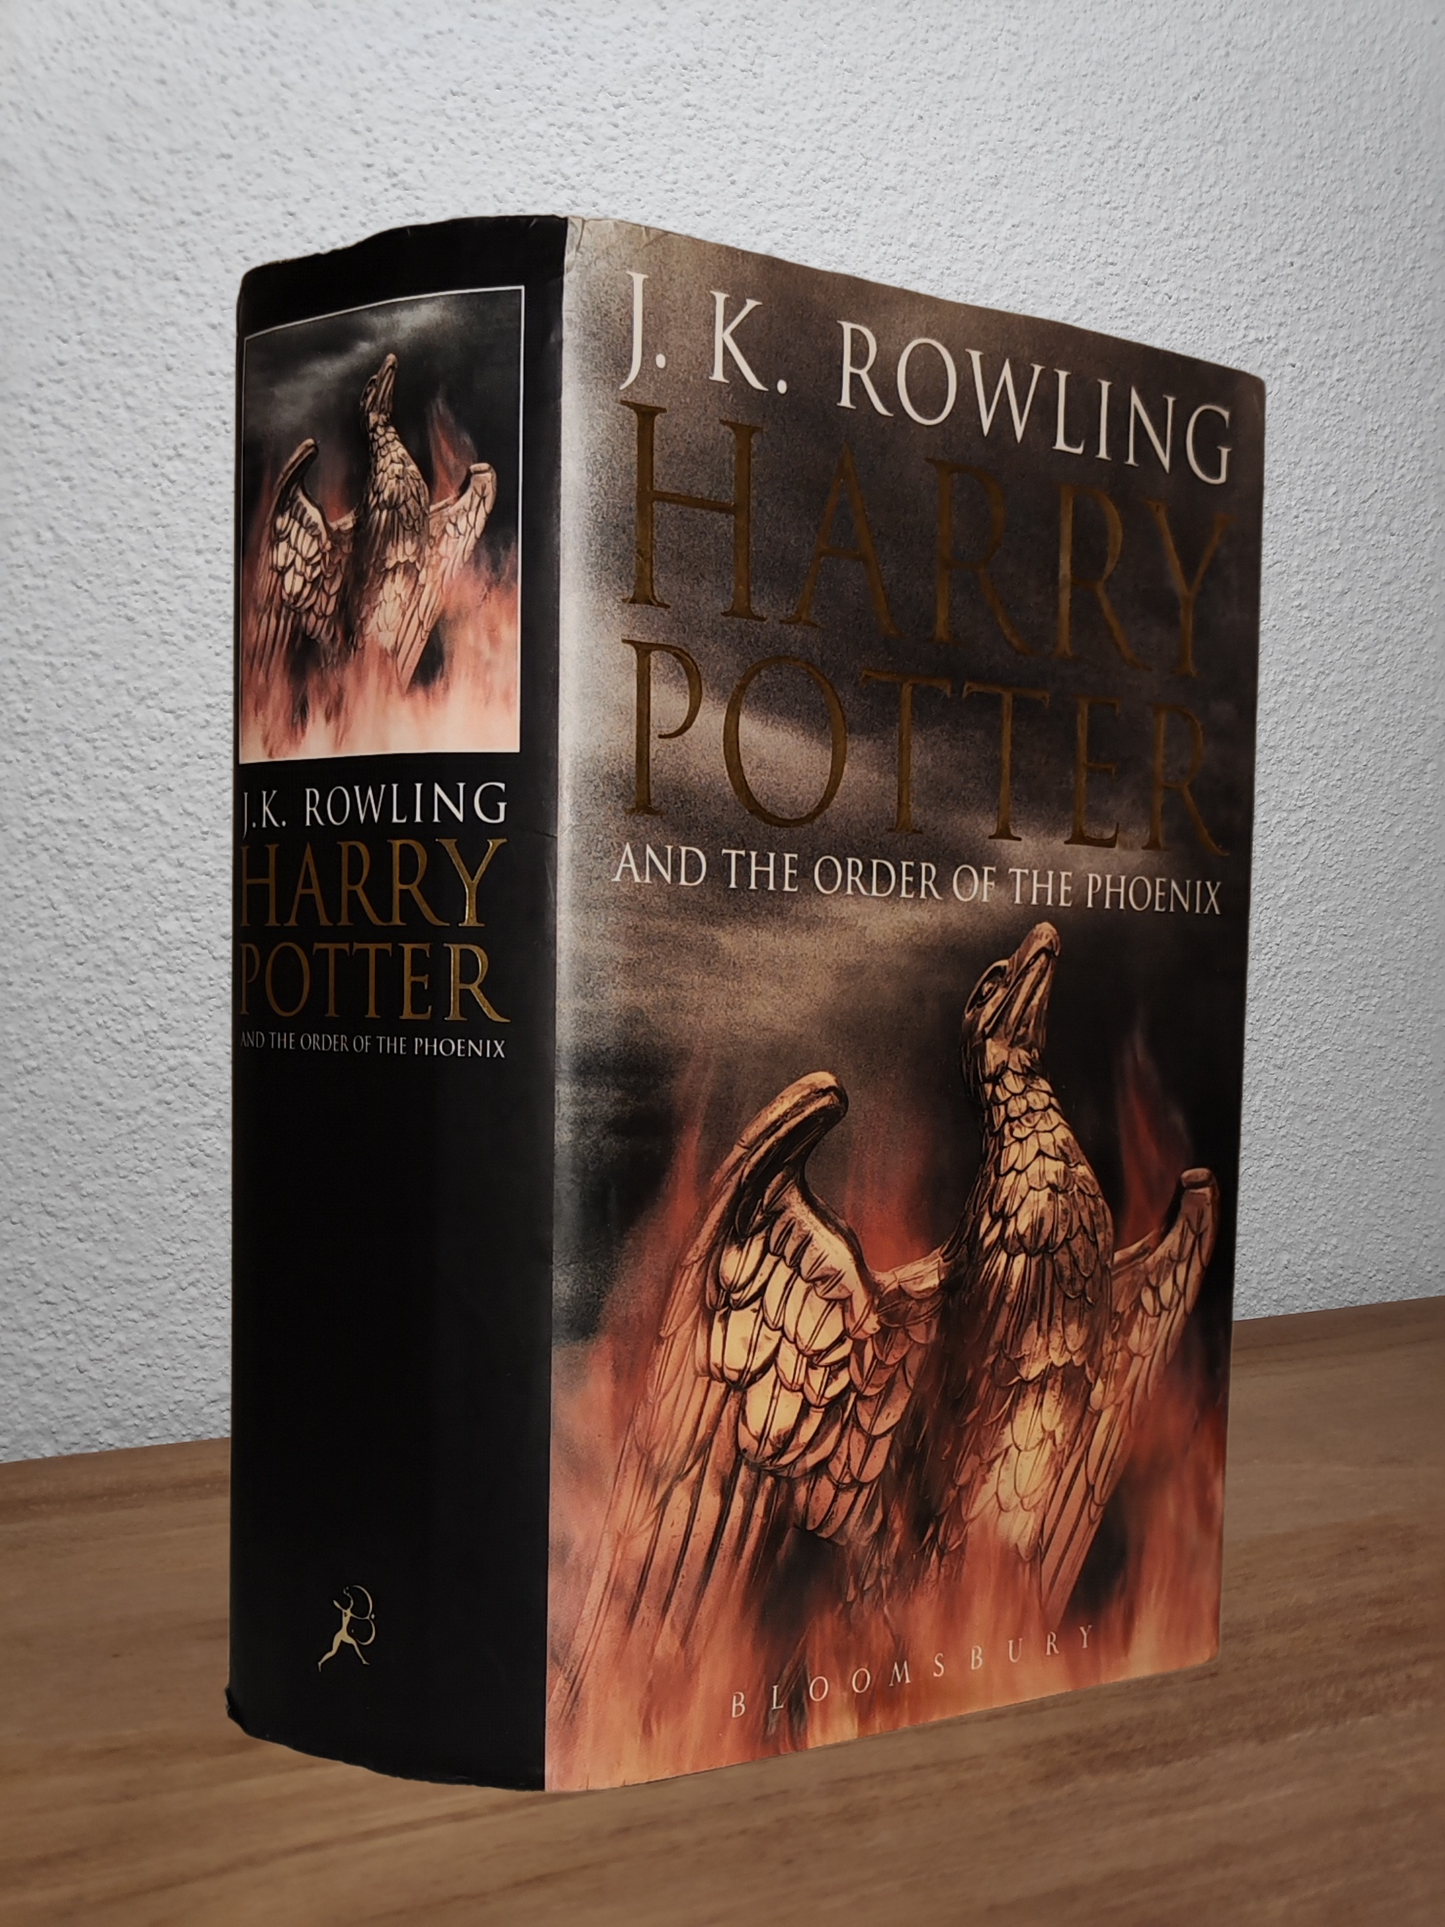 J. K. Rowling - Harry Potter and the Order of the Phoenix   - Second-hand english book to deliver in Zurich & Switzerland